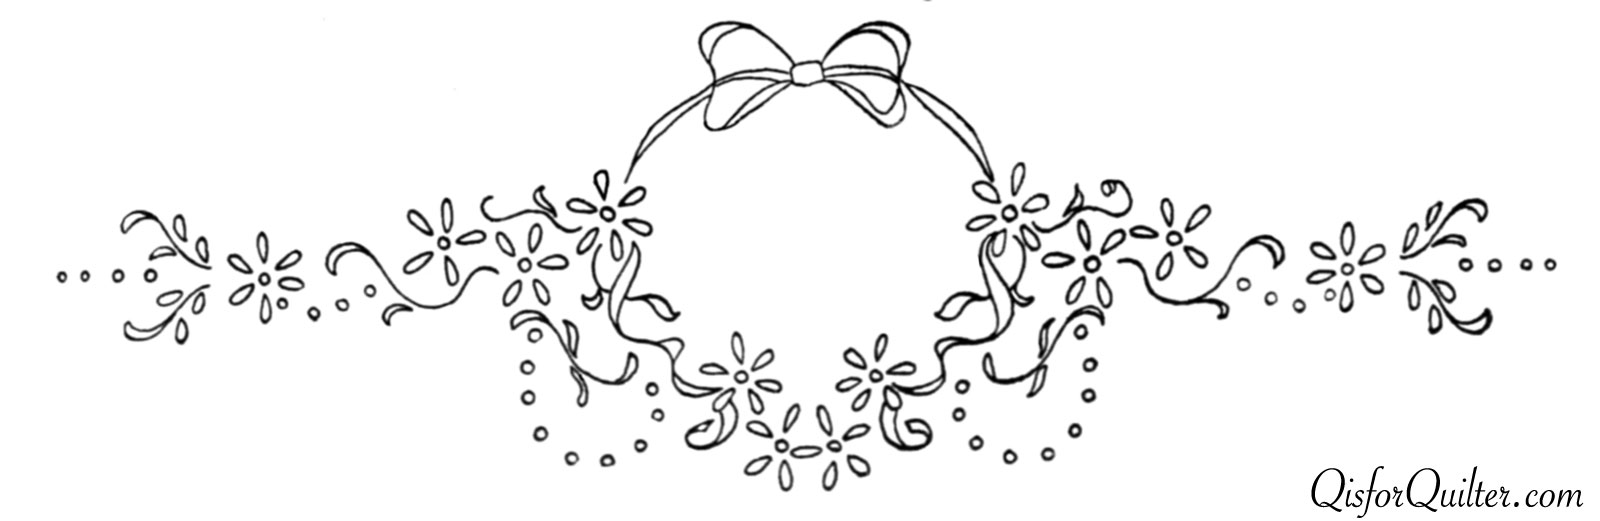 Free Vintage Embroidery Transfers 109